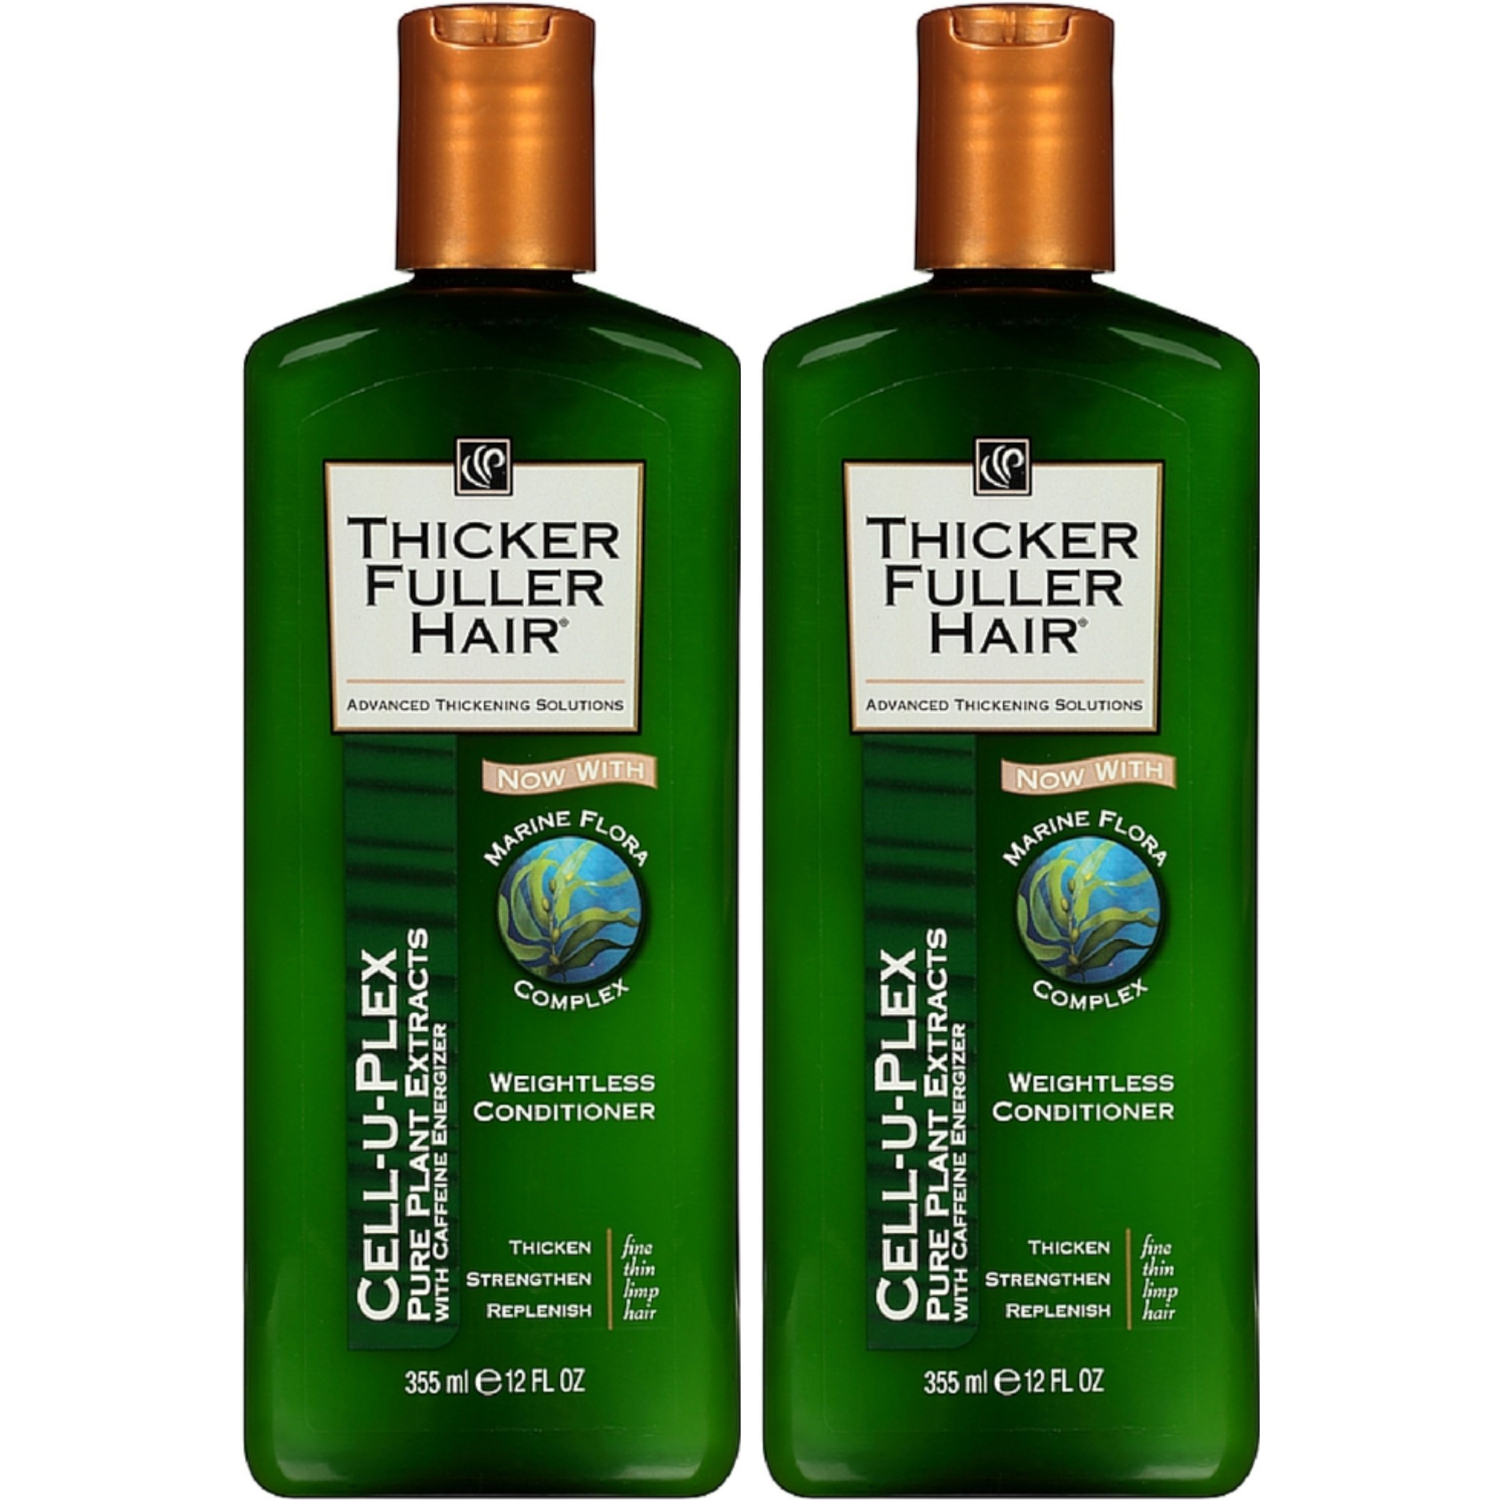 thicker fuller hair shampoo review